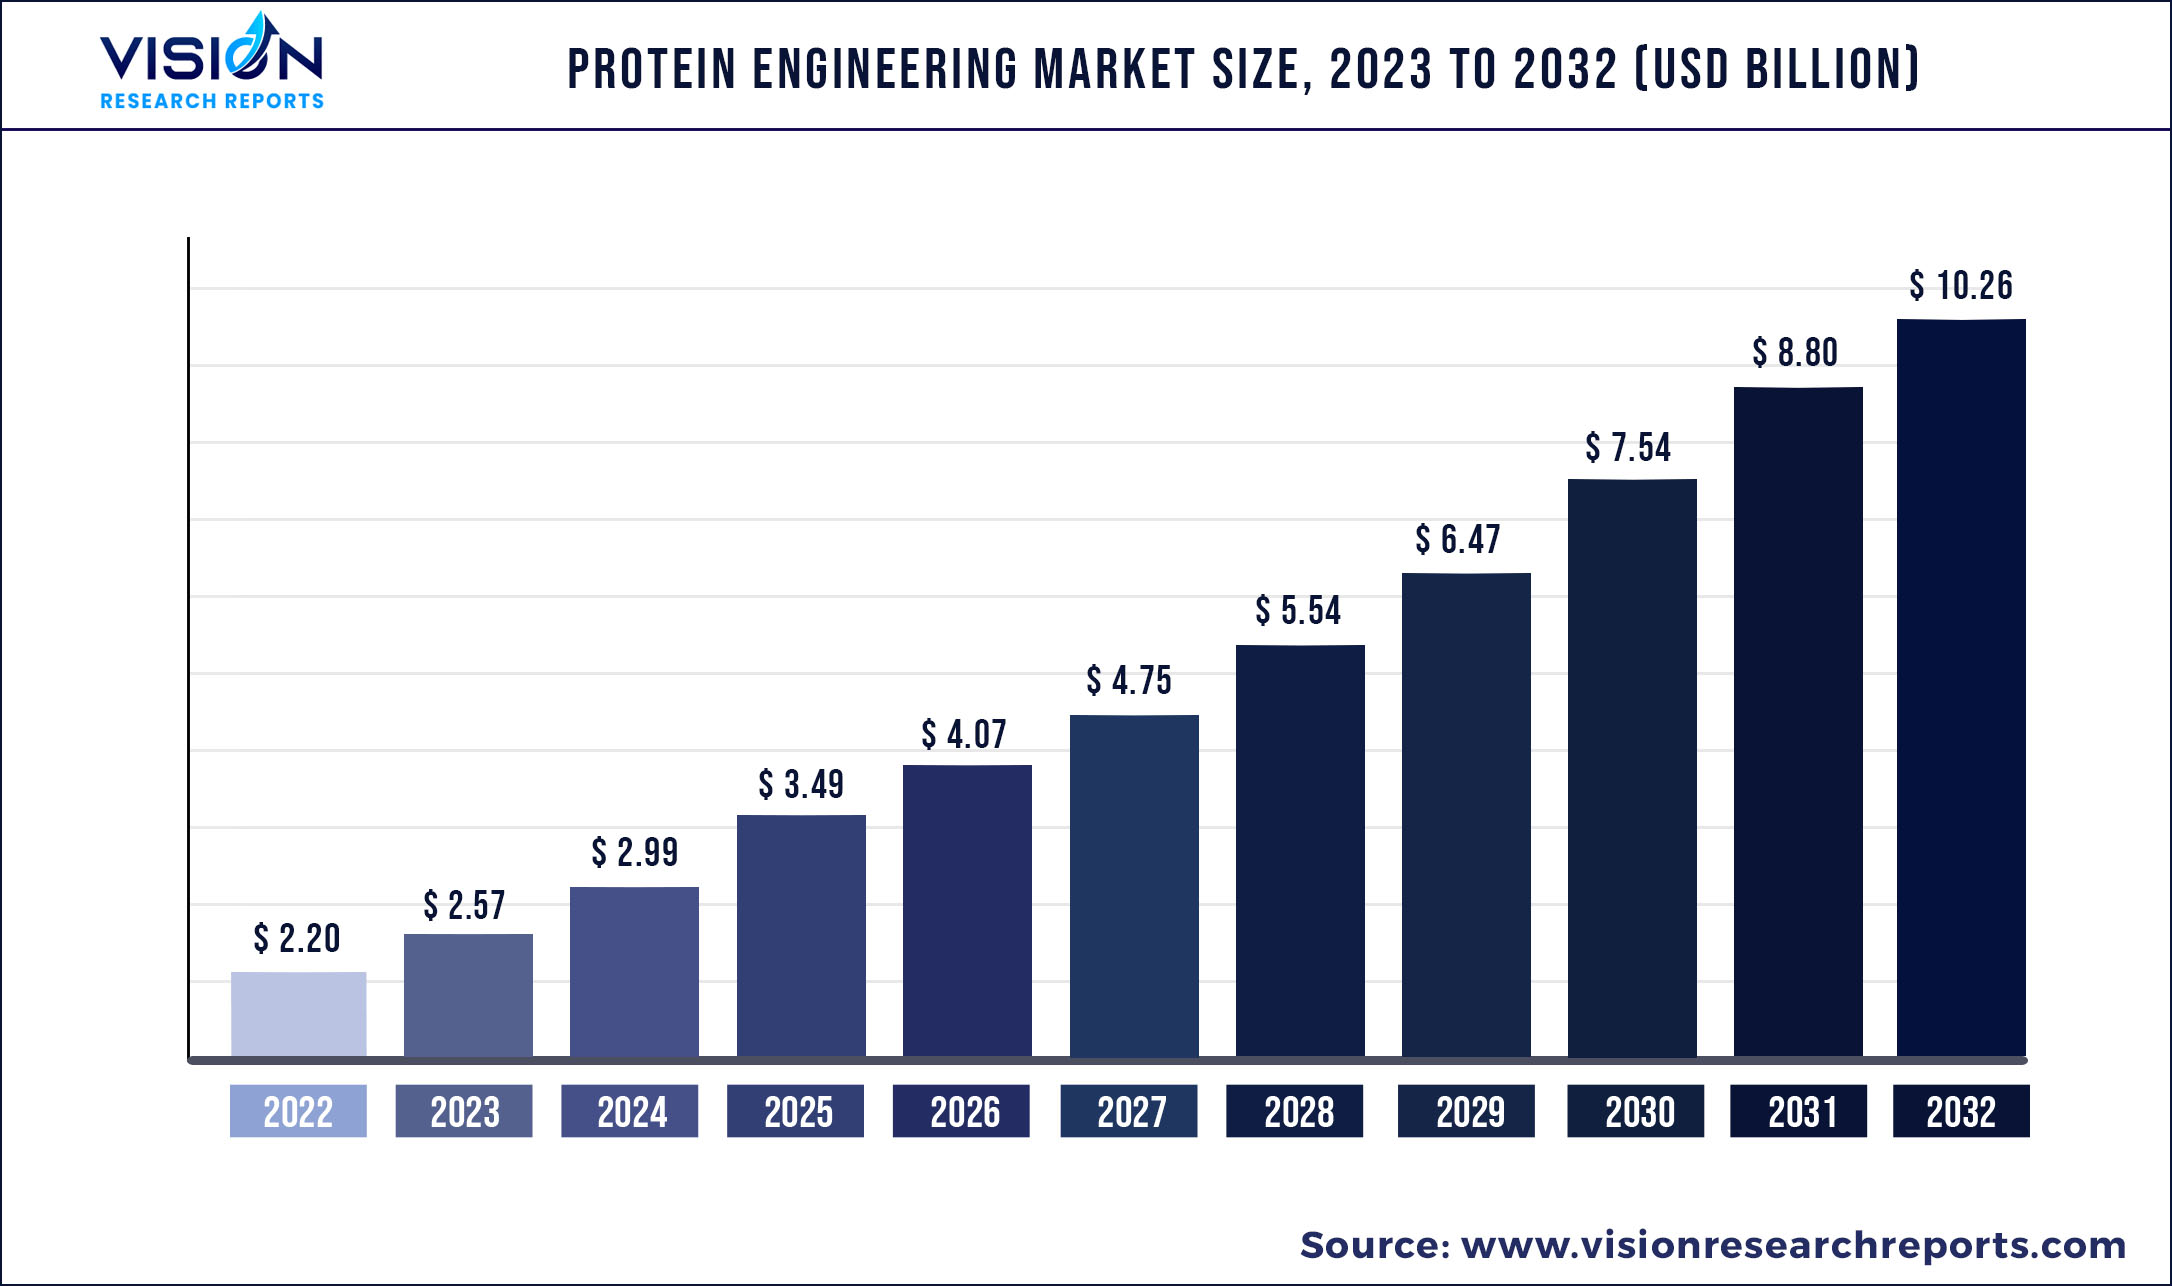 Protein Engineering Market Size 2023 to 2032